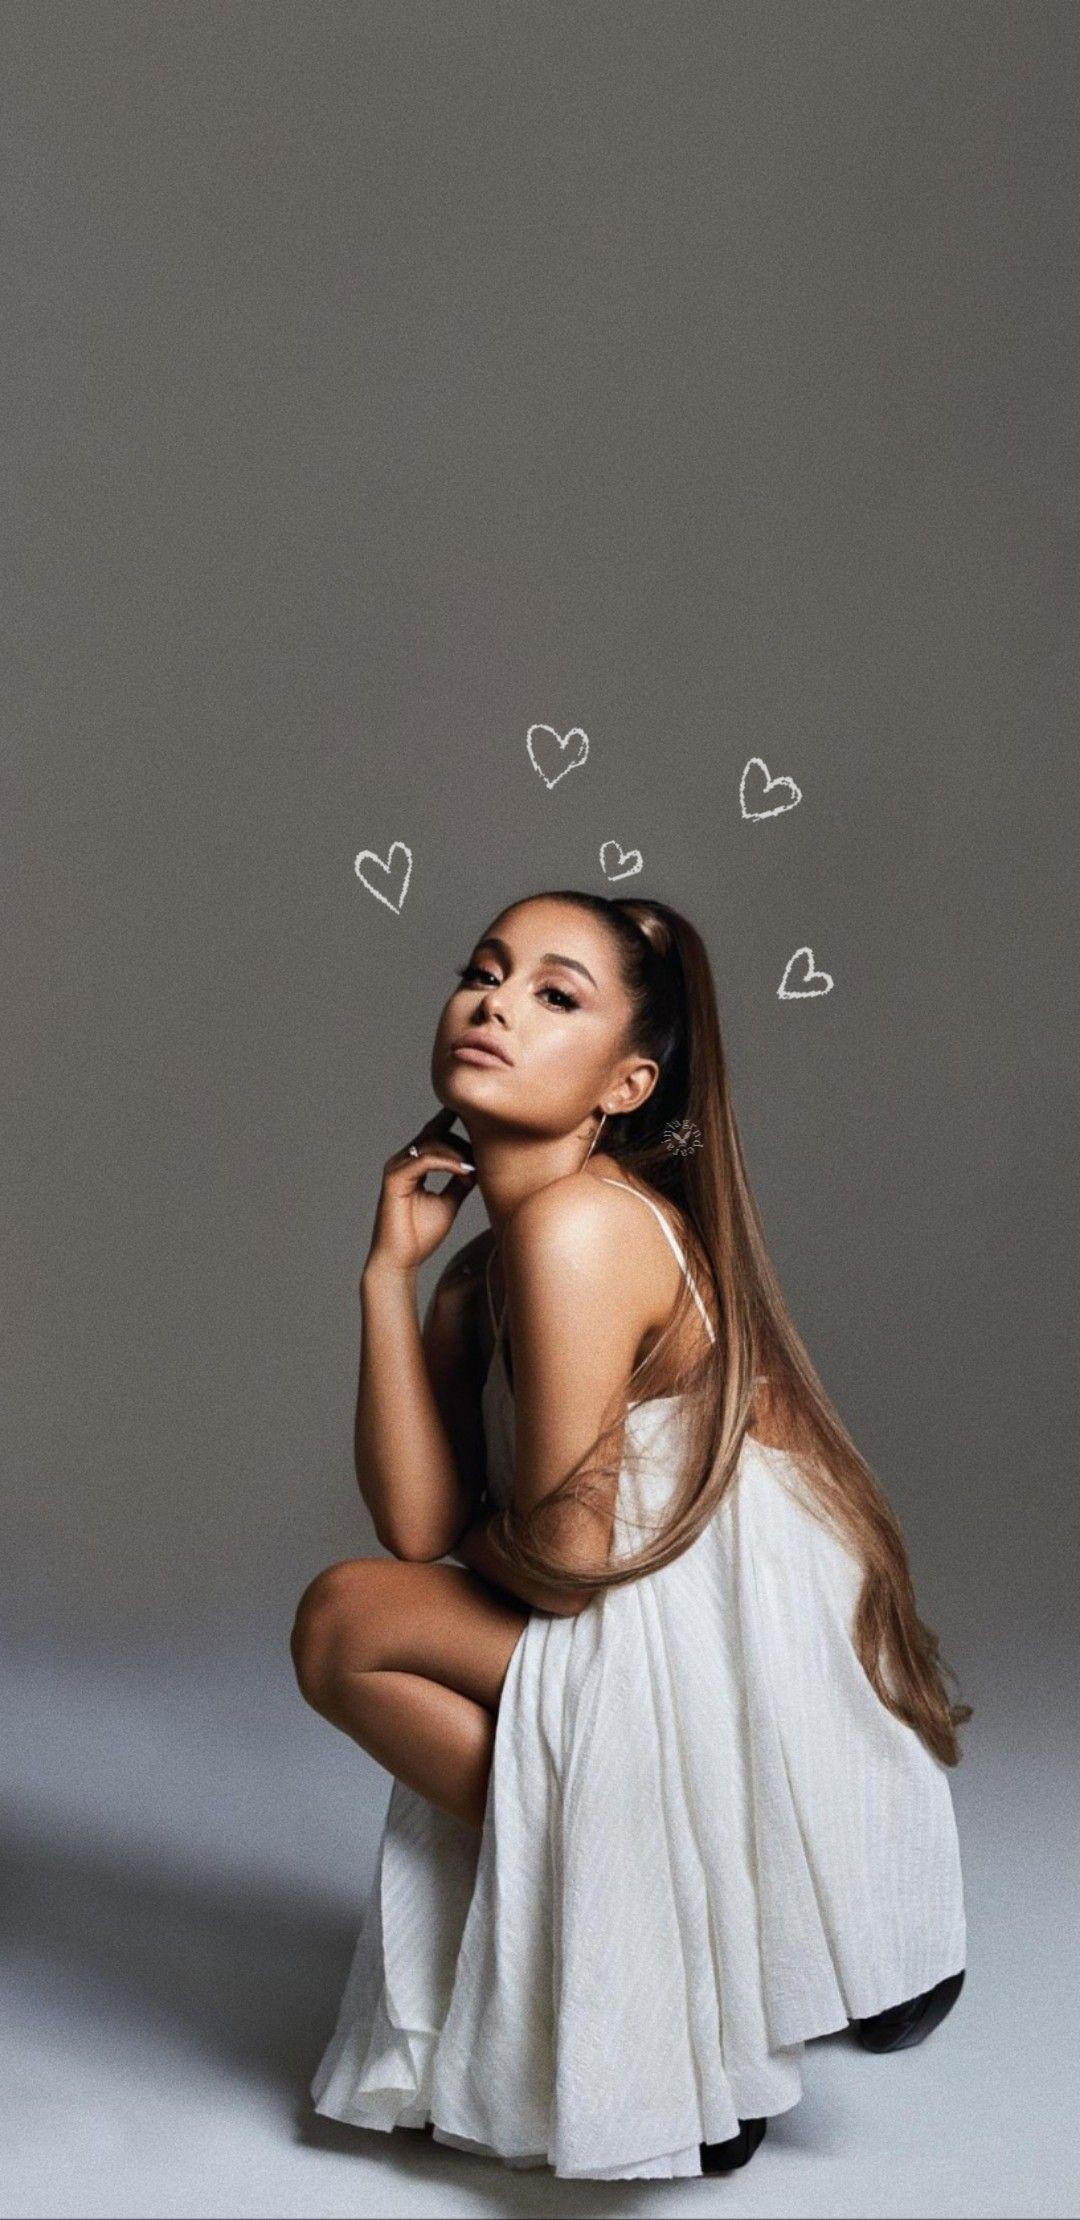 Ariana Grande wallpaper for iPhone with high-resolution 1080x1920 pixel. You can use this wallpaper for your iPhone 5, 6, 7, 8, X, XS, XR backgrounds, Mobile Screensaver, or iPad Lock Screen - Ariana Grande